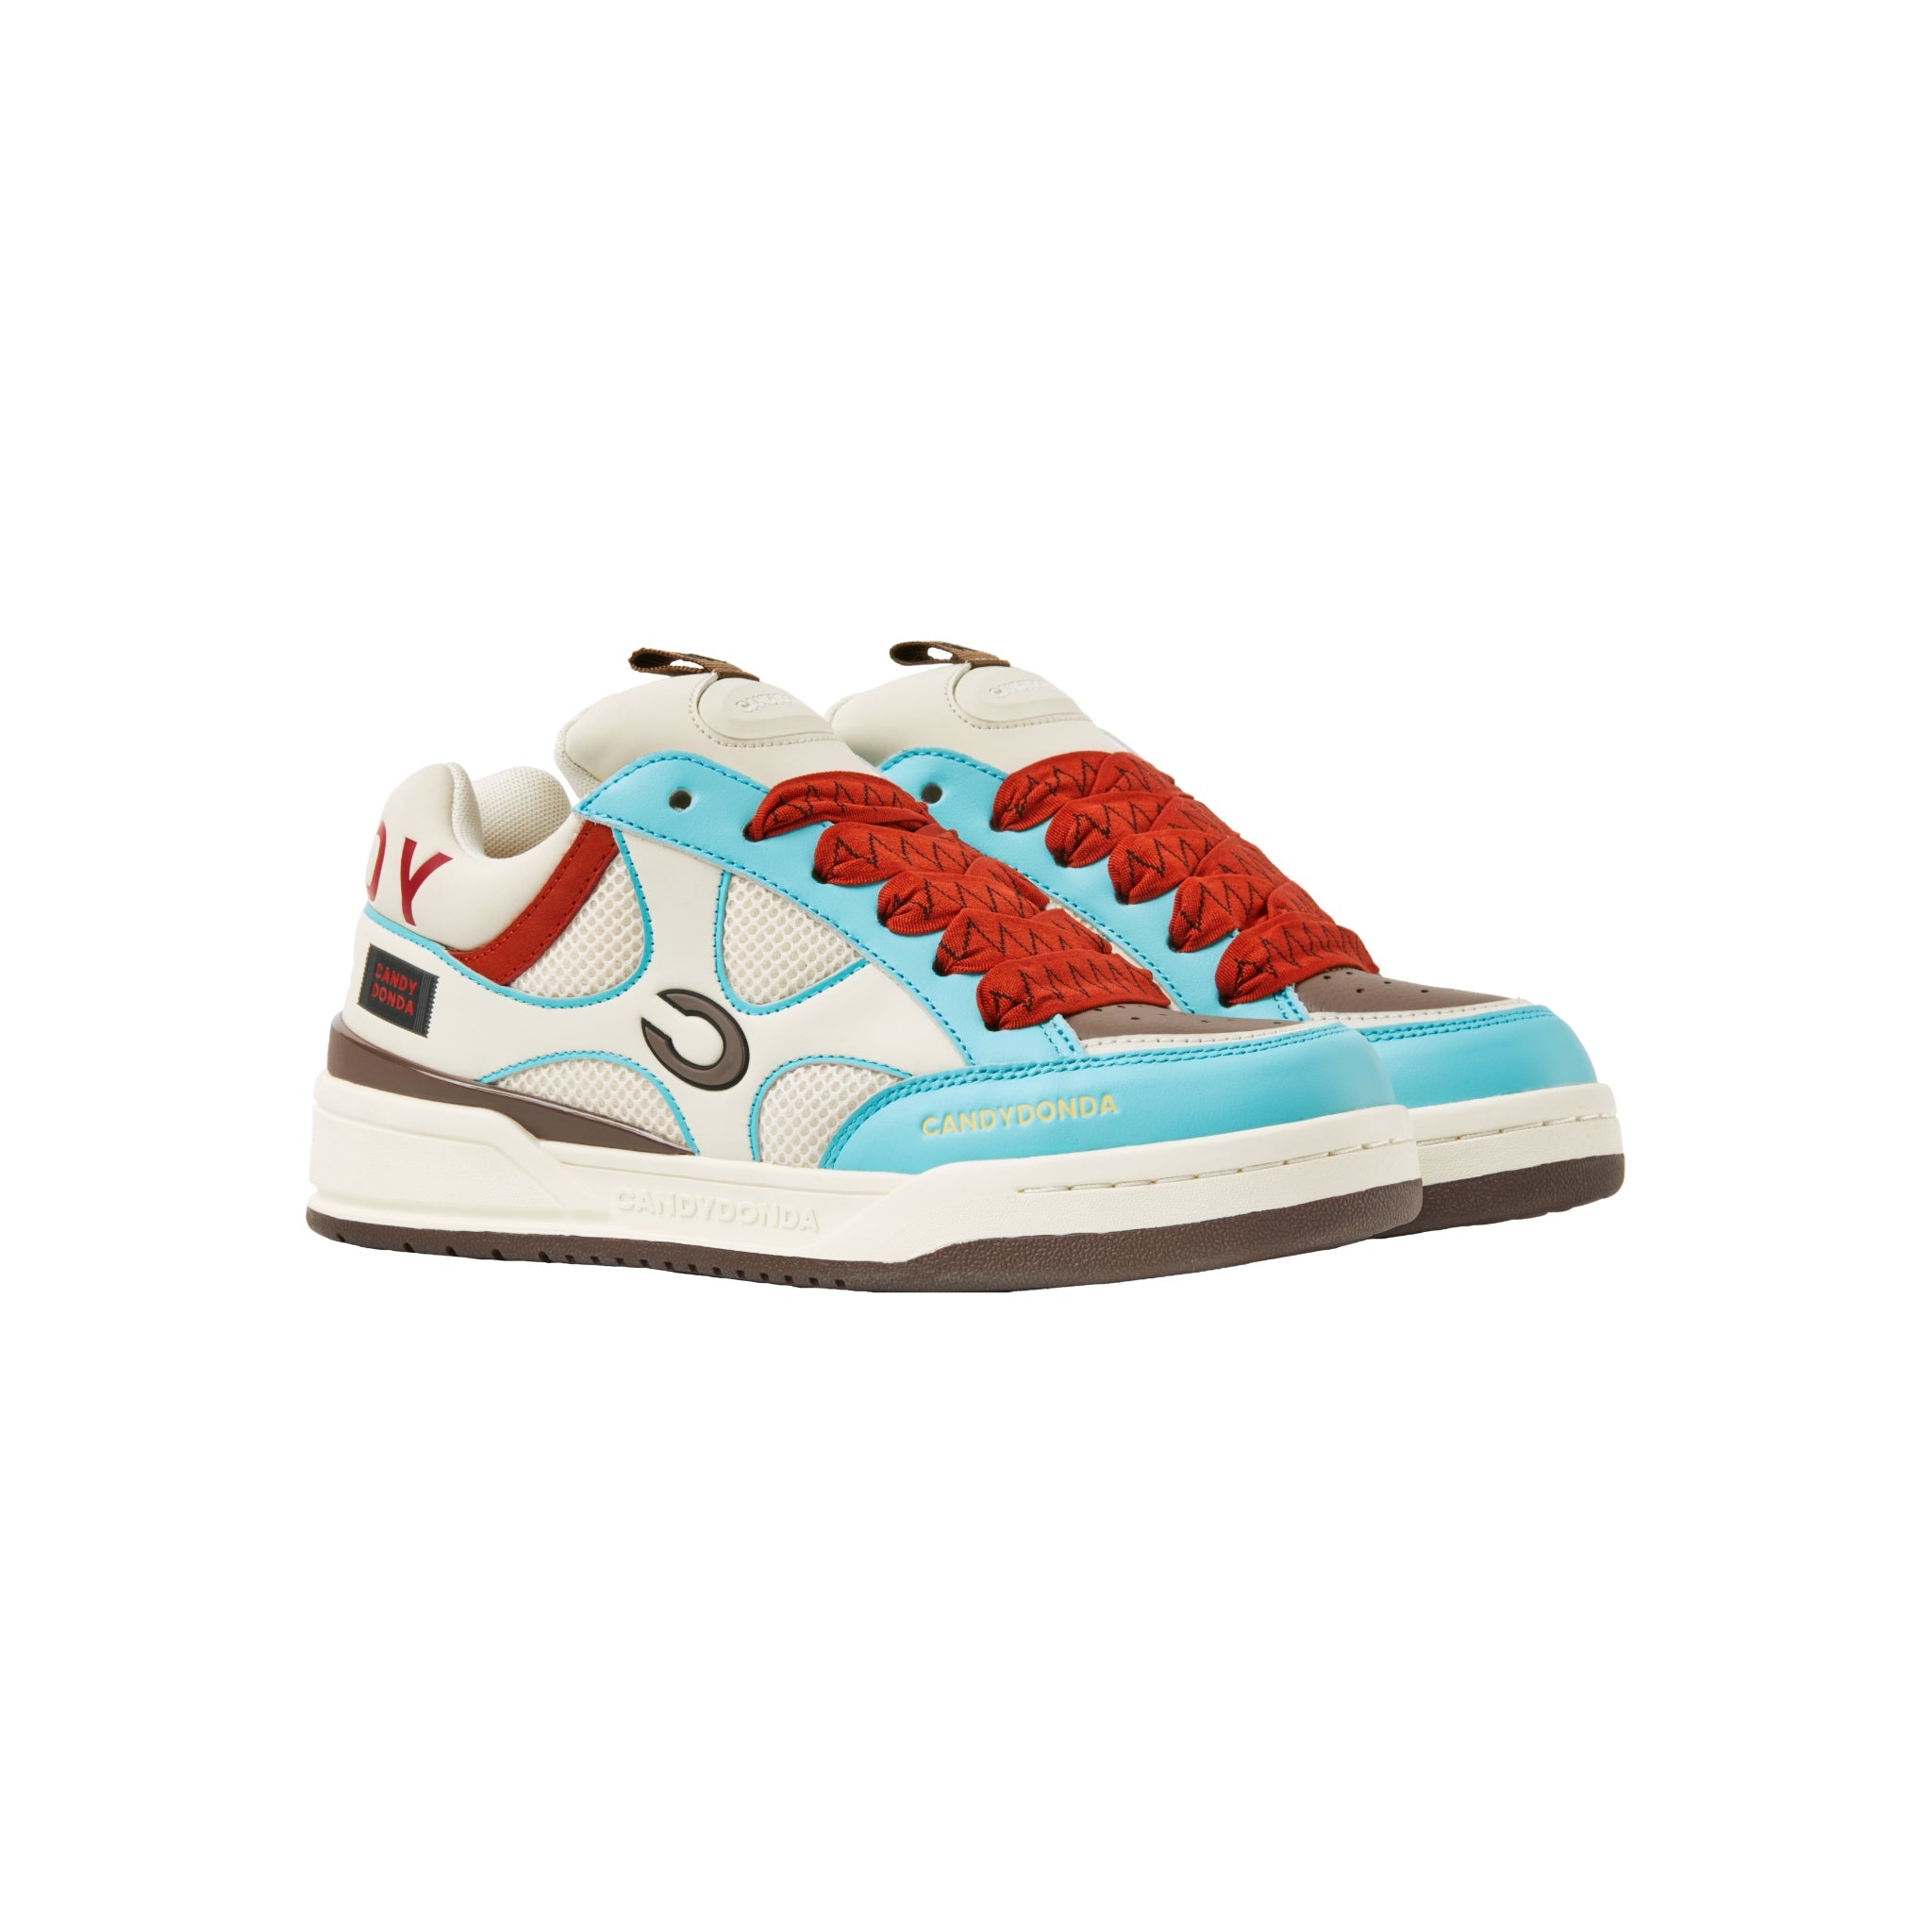 CANDYDONDA Red Shoelace Sneakers | MADA IN CHINA